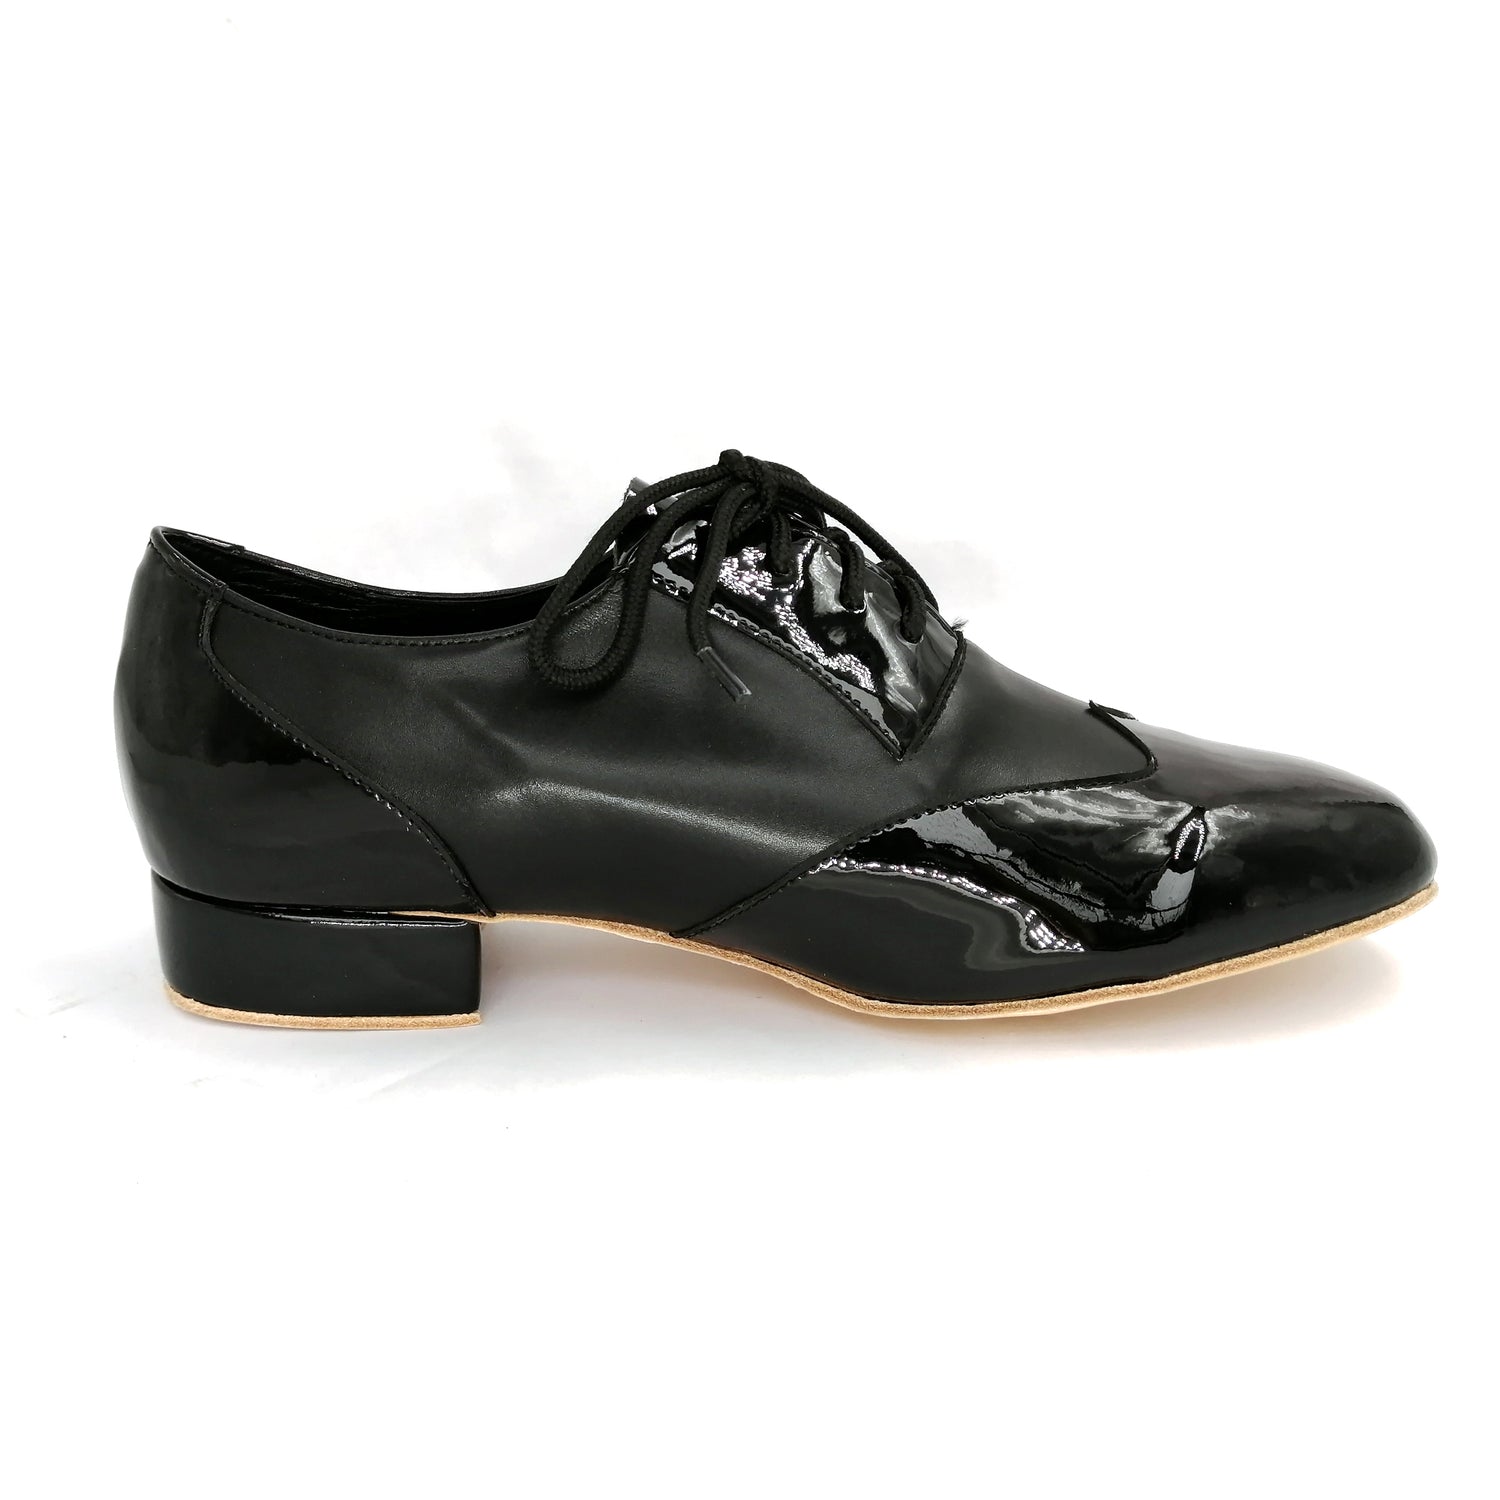 Pro Dancer Tango Shoes for Men with Leather Sole, 1 inch Heel, Lace-up in Black (PD-1005B)1